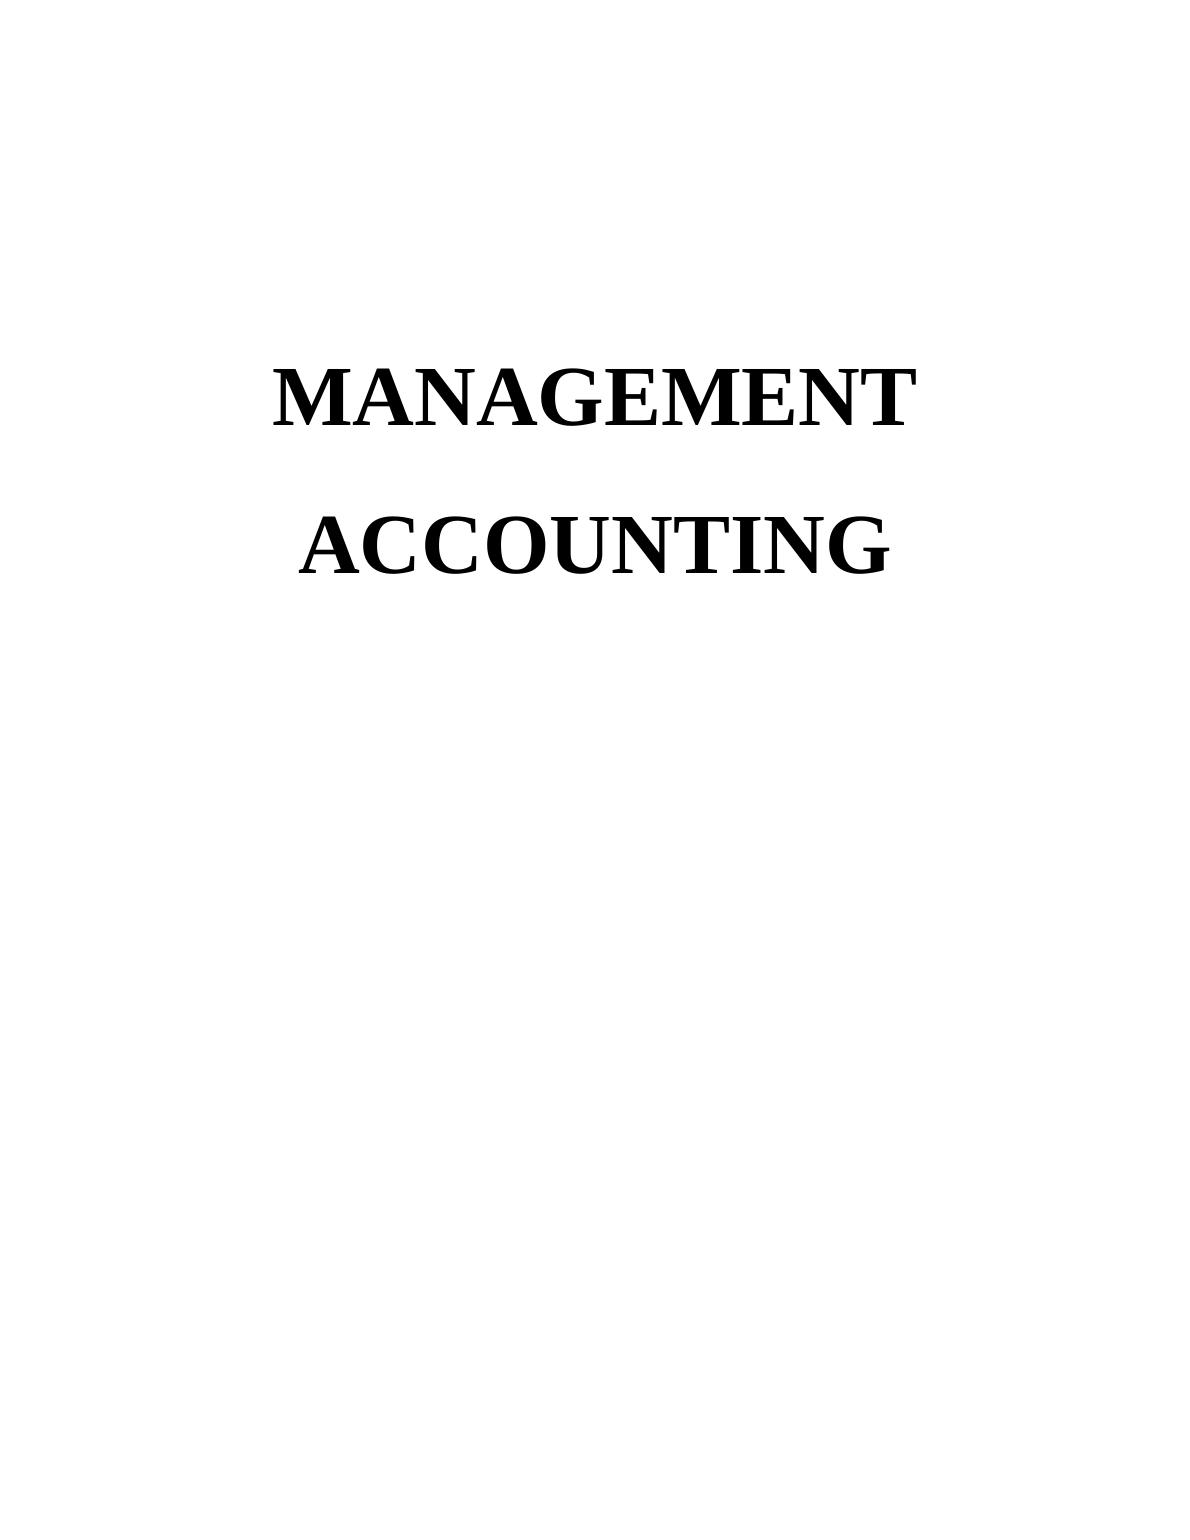 Cost Assessment and Review of Financial Statements_1